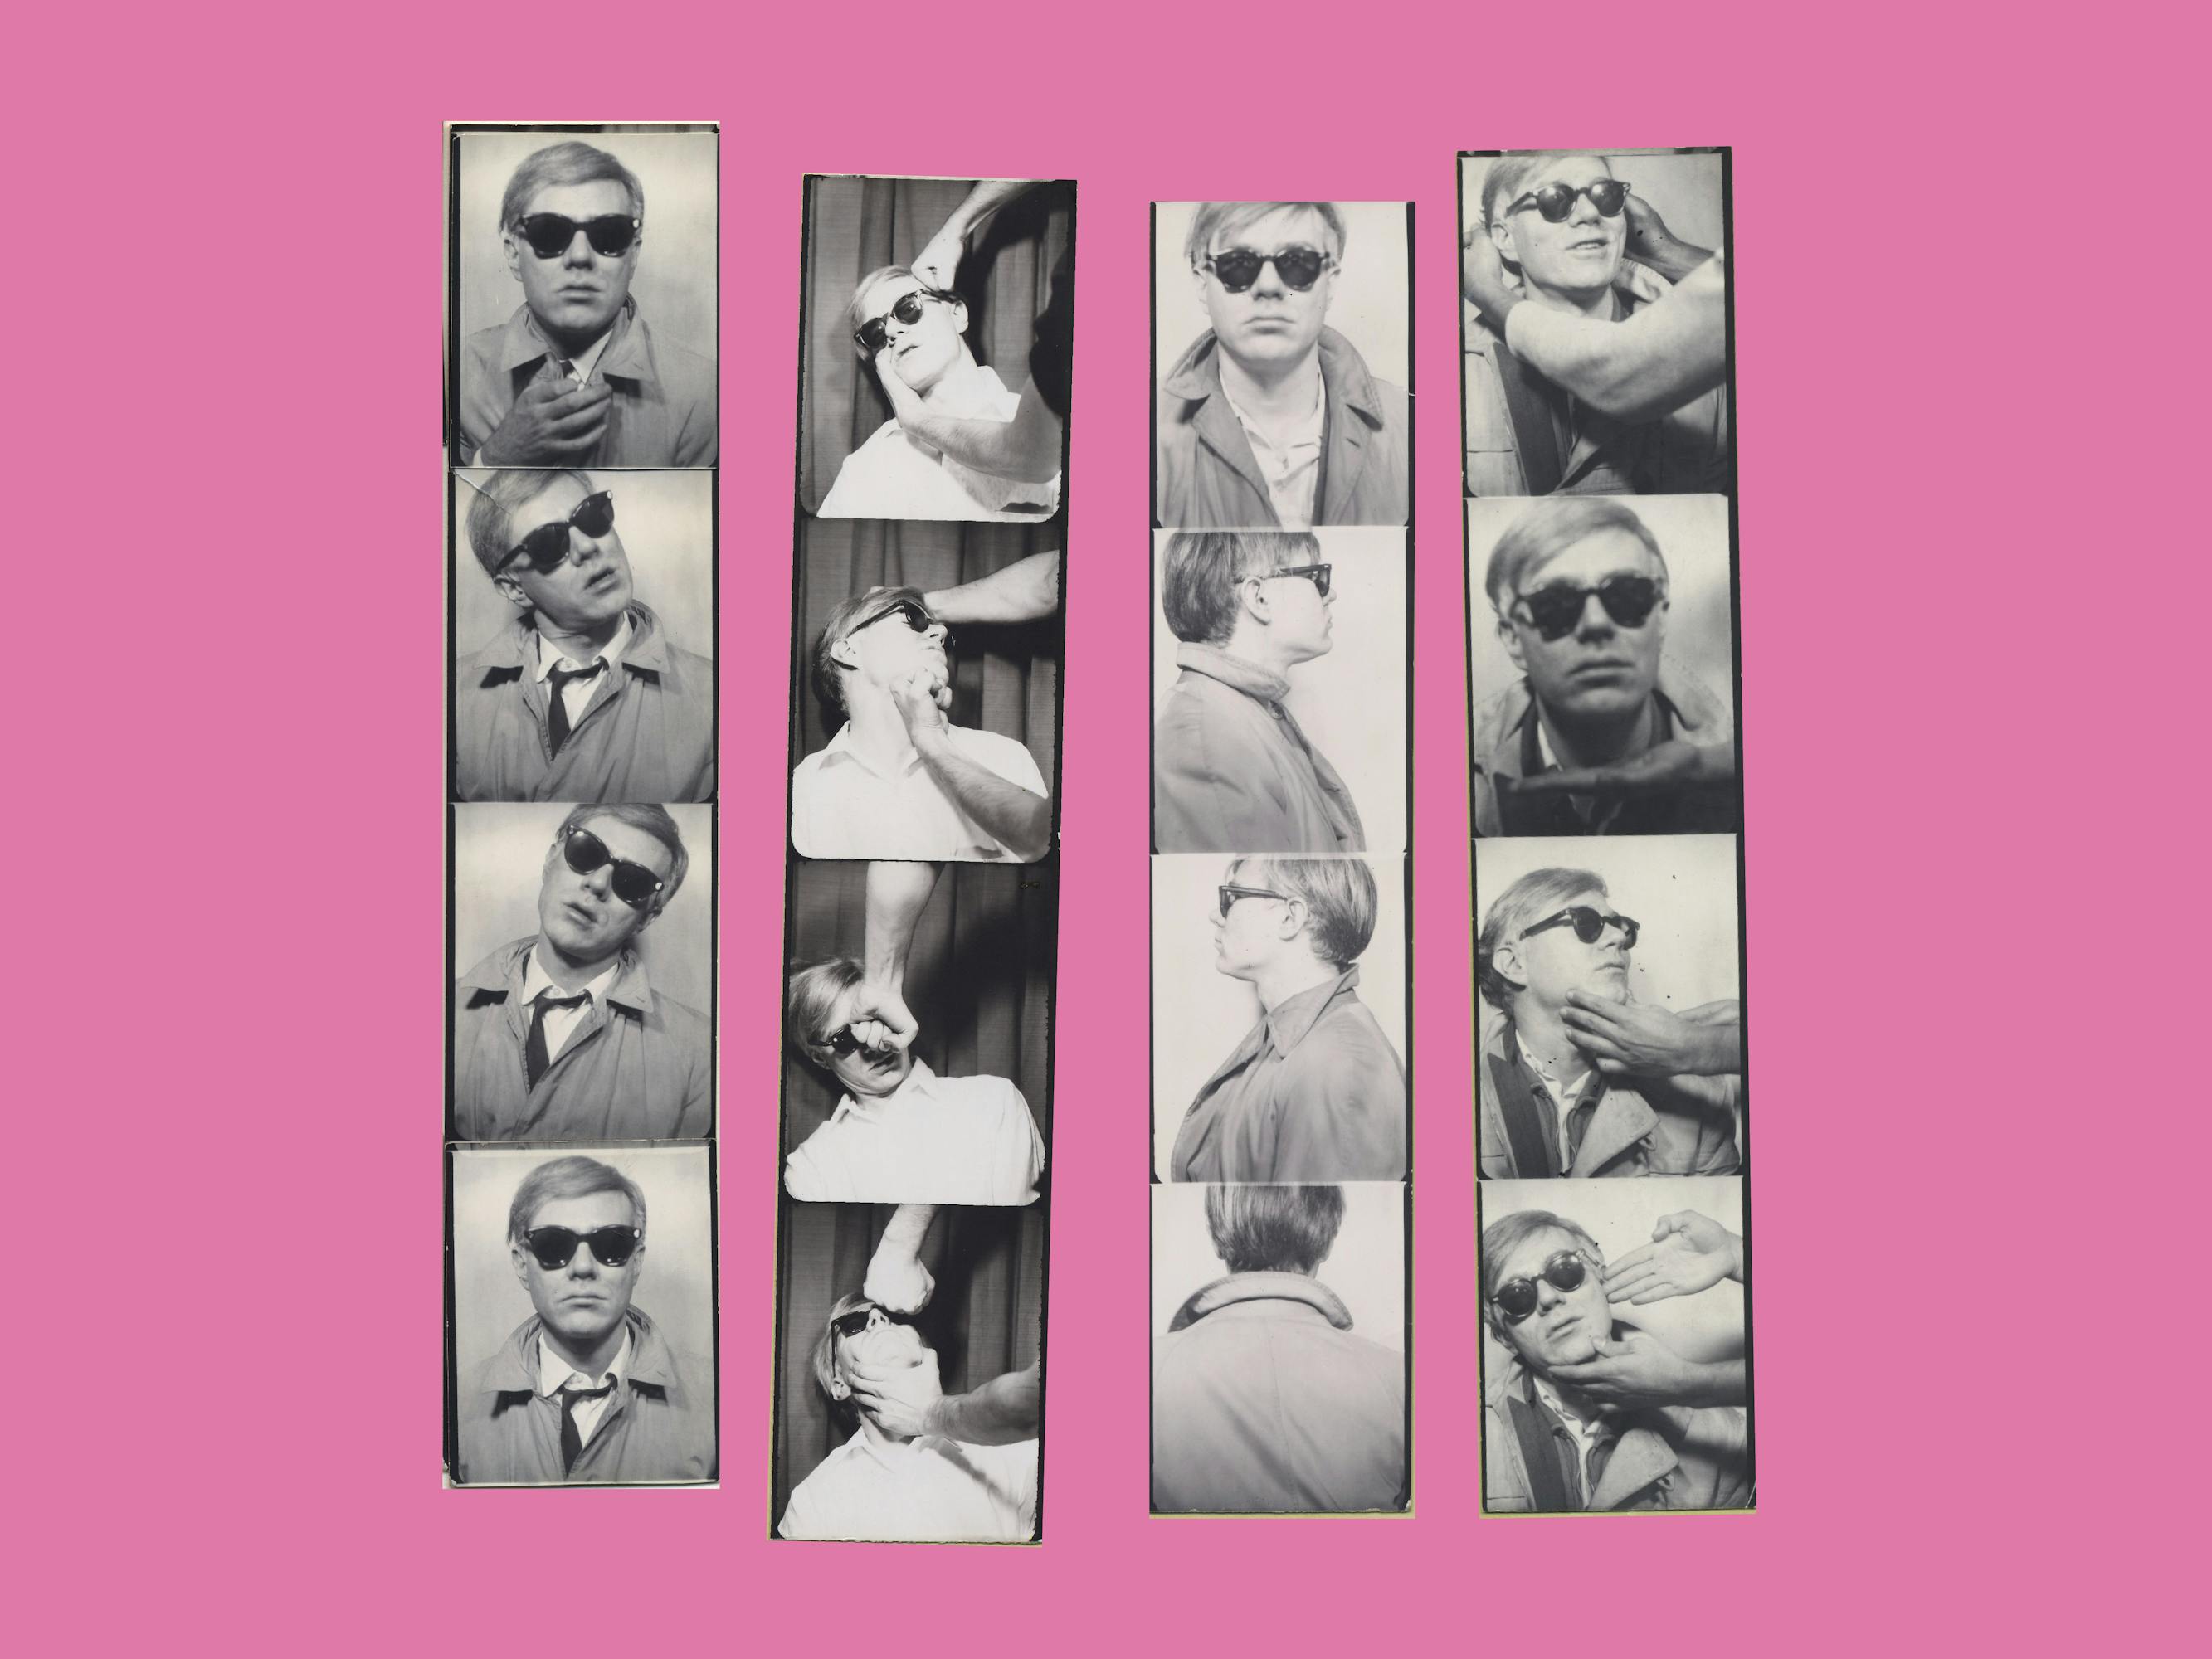 4 photo-booth strips of Andy Warhol set against a pink background.